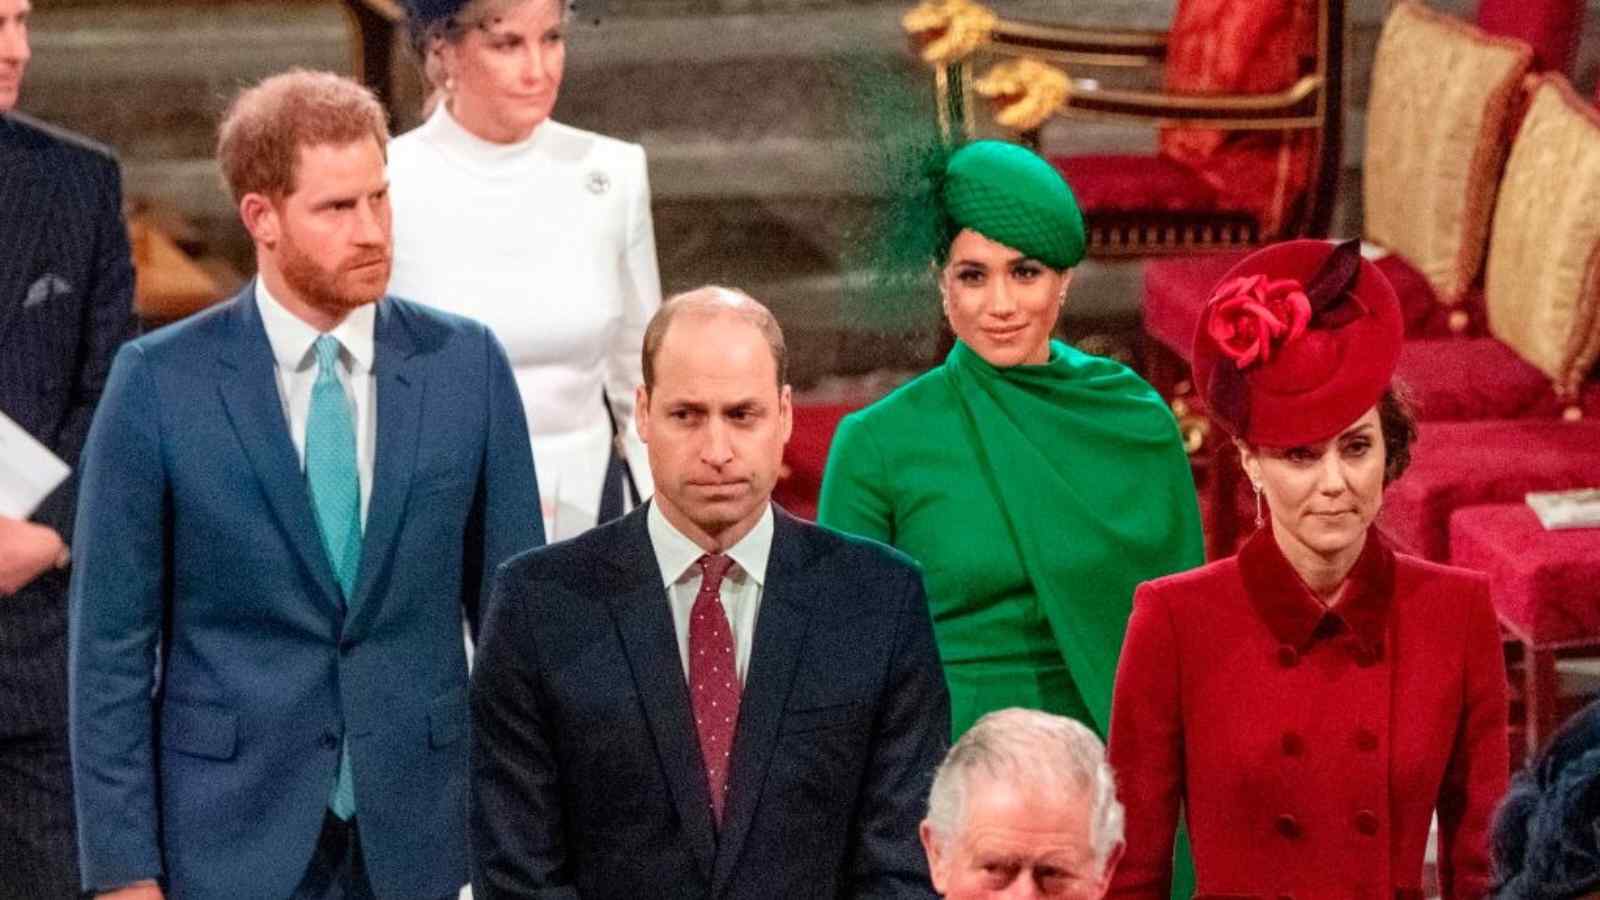 Harry and Meghan with William and Kate.